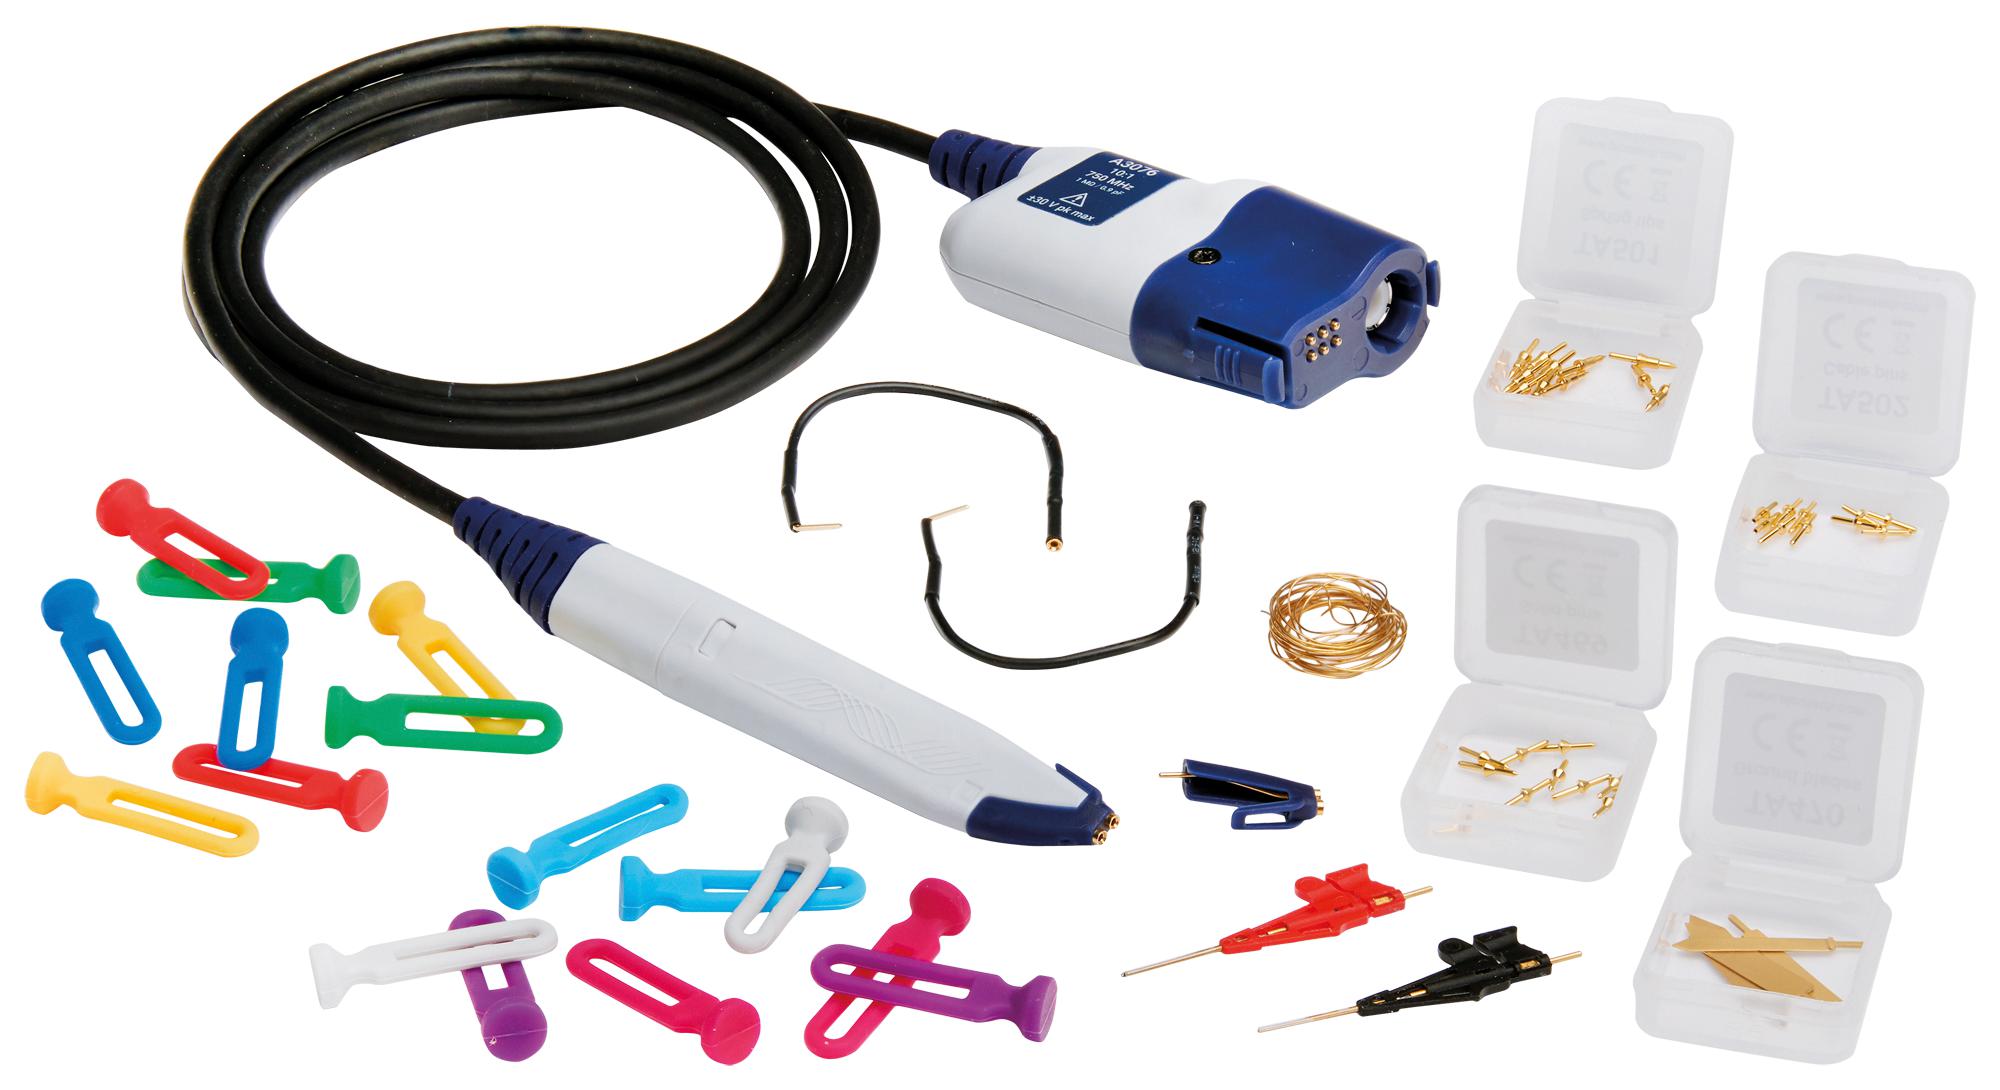 A3000 ACCESSORY PACK PROBE ACCESSORY KIT PICO TECHNOLOGY